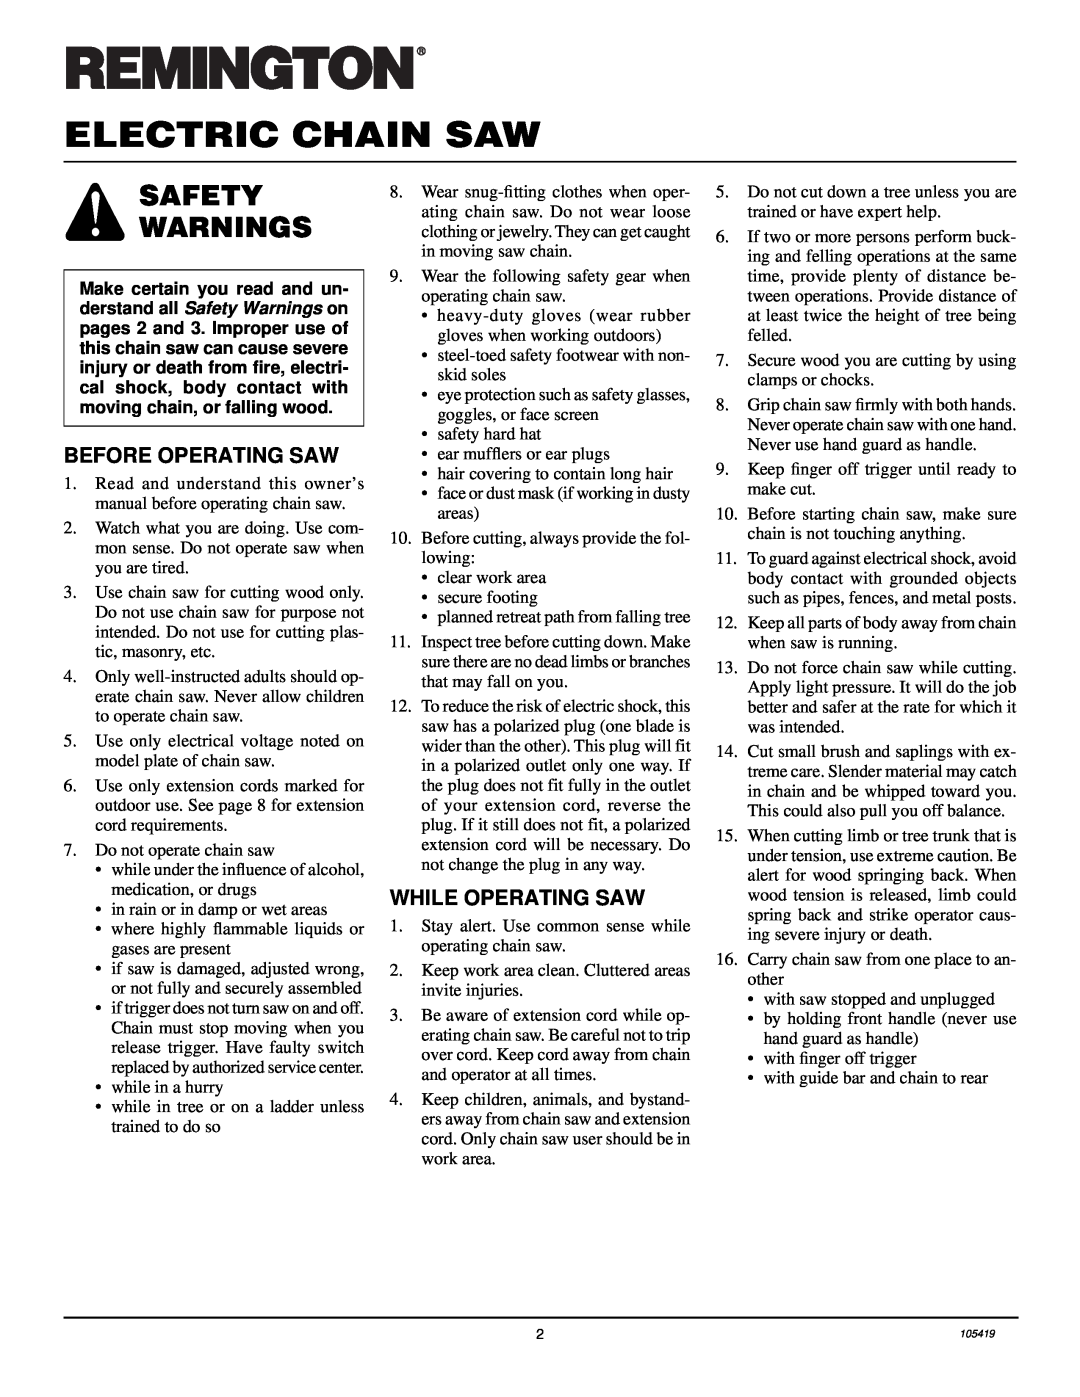 Desa 076702J, 100089-01, 076728K, 104316-04 Electric Chain Saw, Safety Warnings, Before Operating Saw, While Operating Saw 